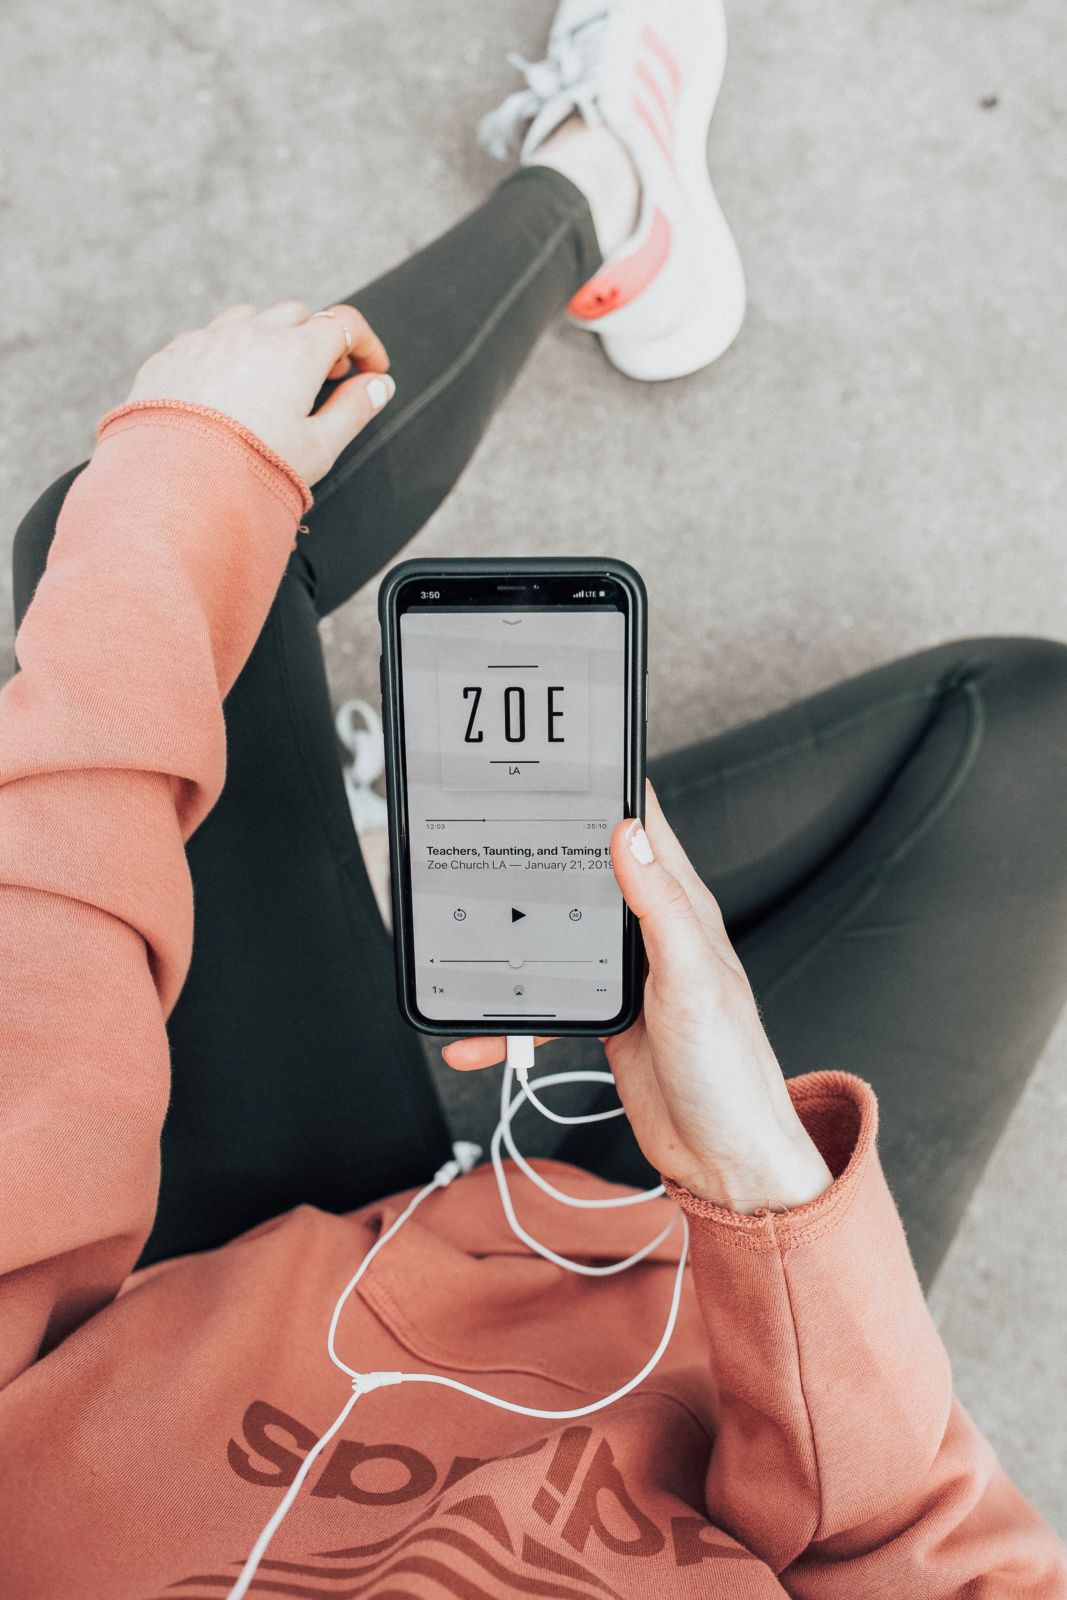 Zoe Church la podcast & best podcasts | oh darling blog